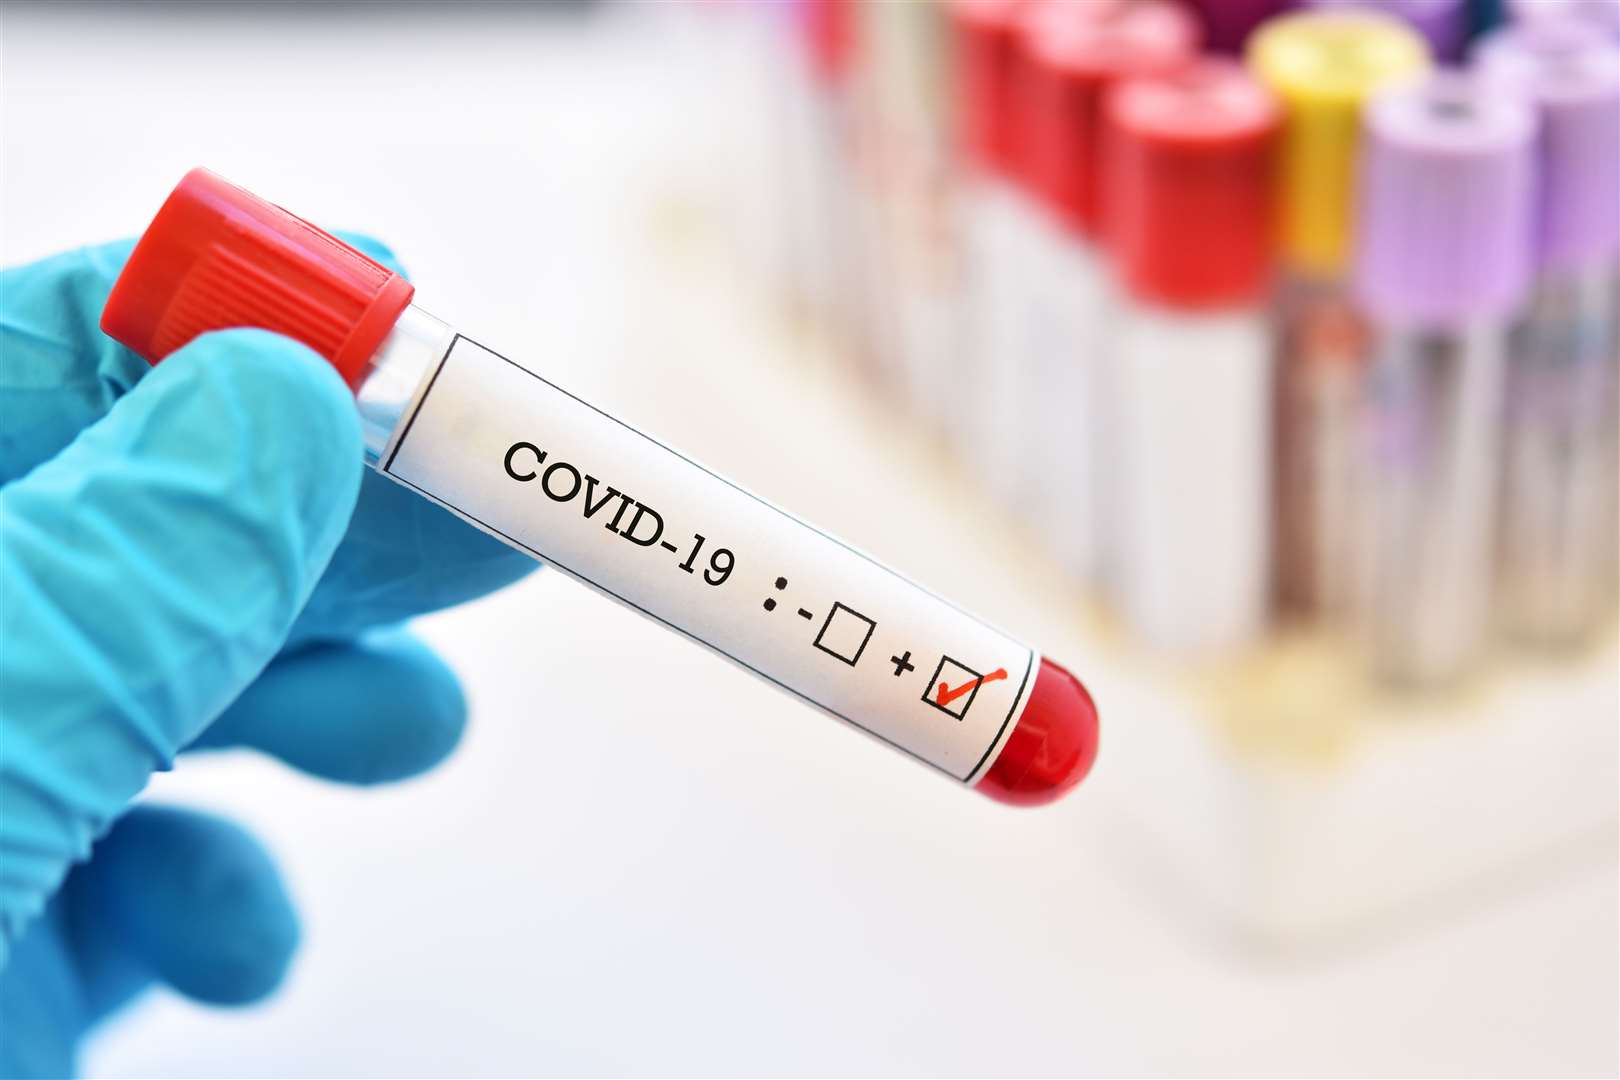 A positive covid test means that you will need to isolate, according to the law. Picture: iStock